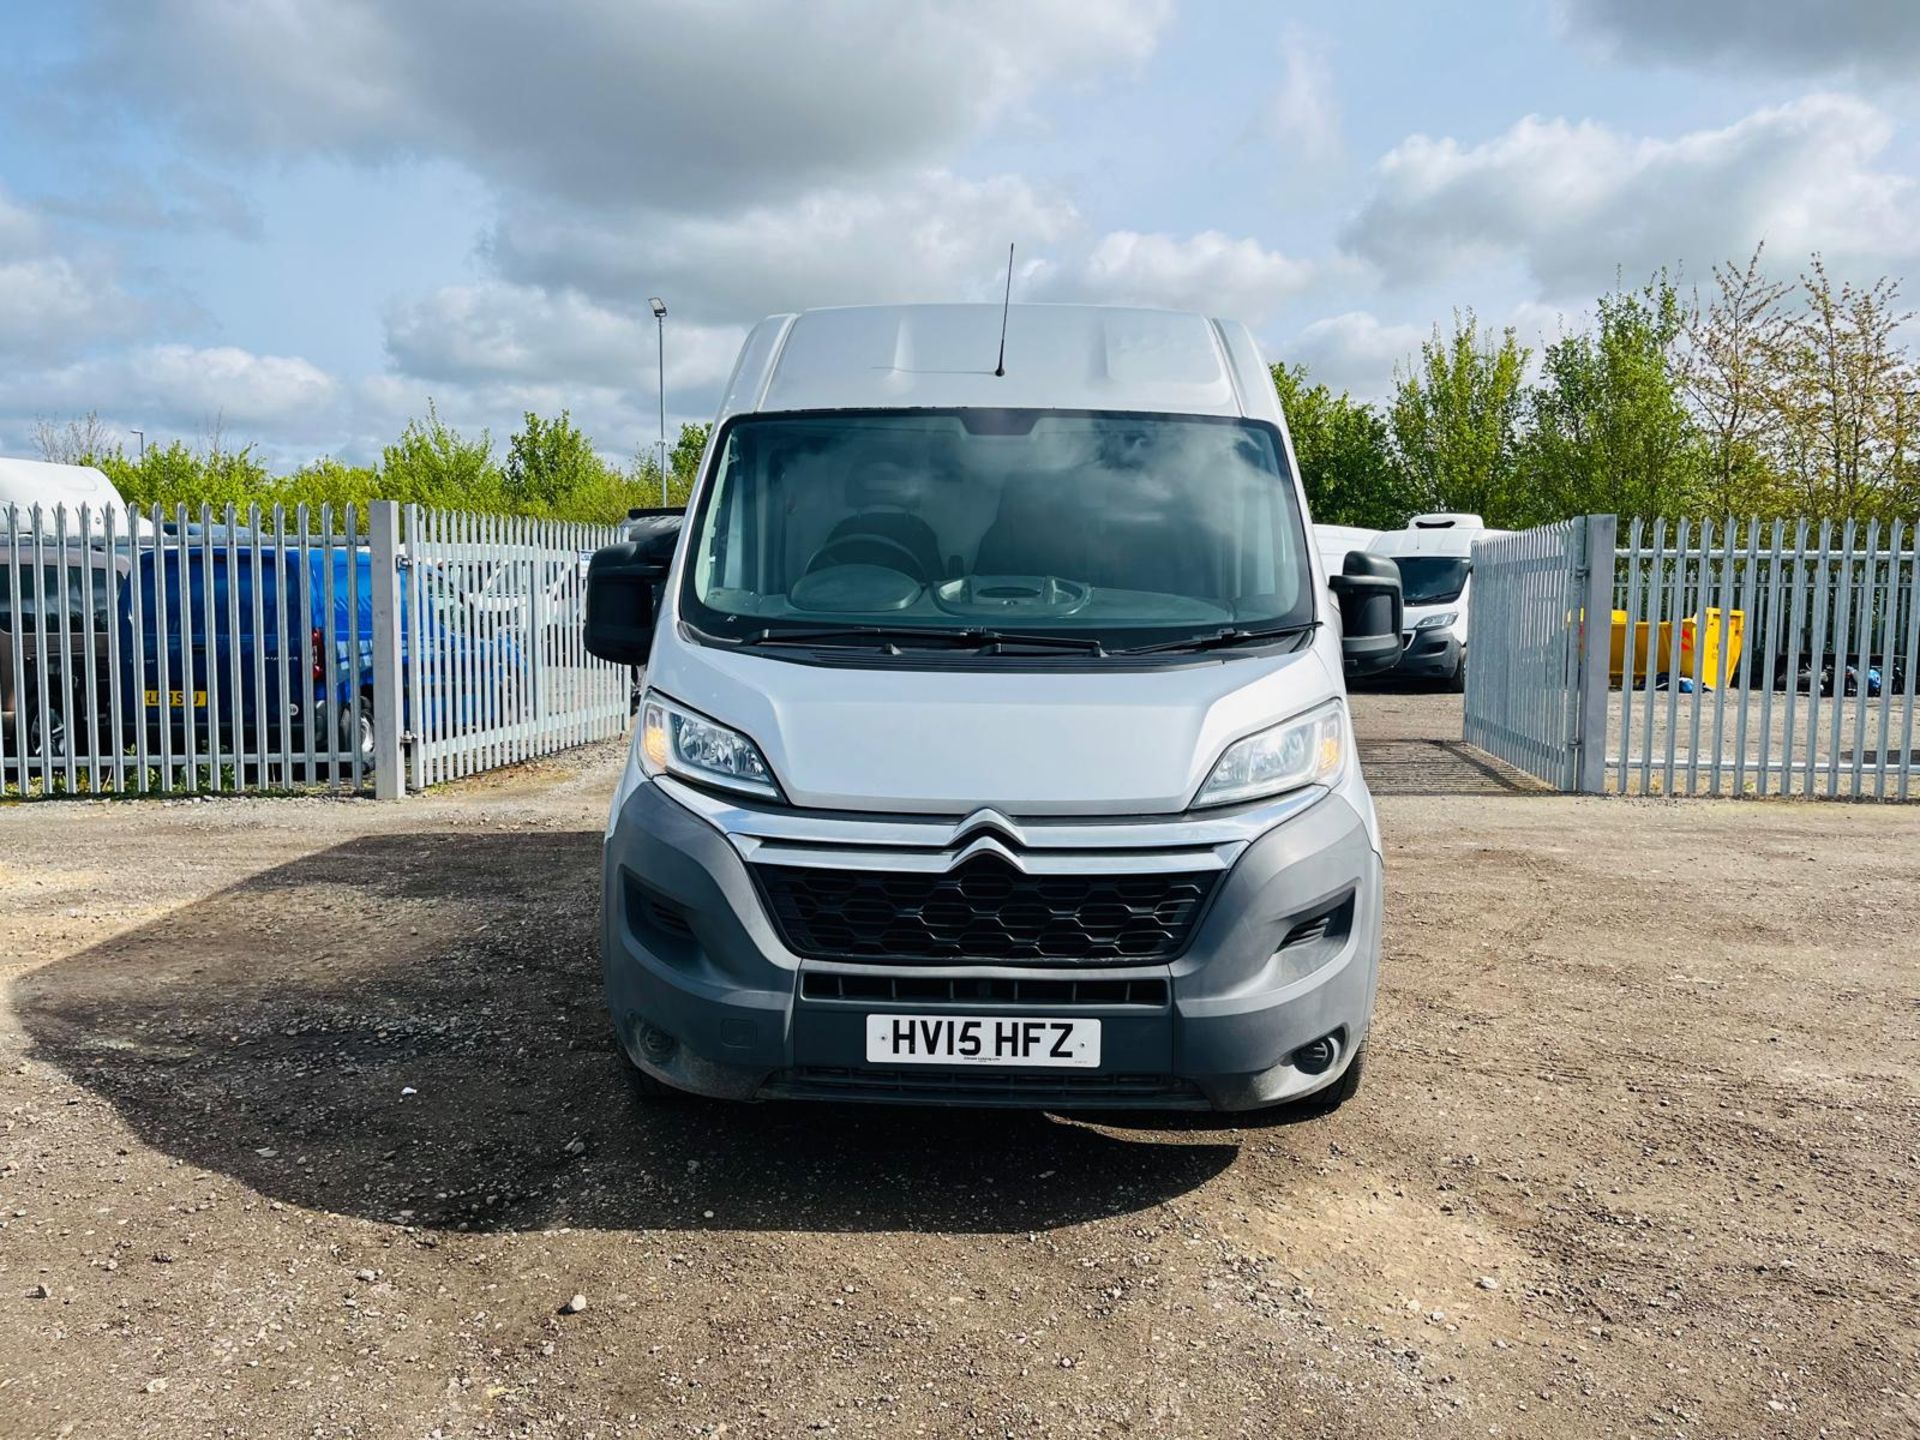 ** ON SALE ** Citroen Relay 2.2 HDI 130 Enterprise L2 H2 2.2 2015 '15 Reg' -A/C- Plylined- Bluetooth - Image 2 of 29